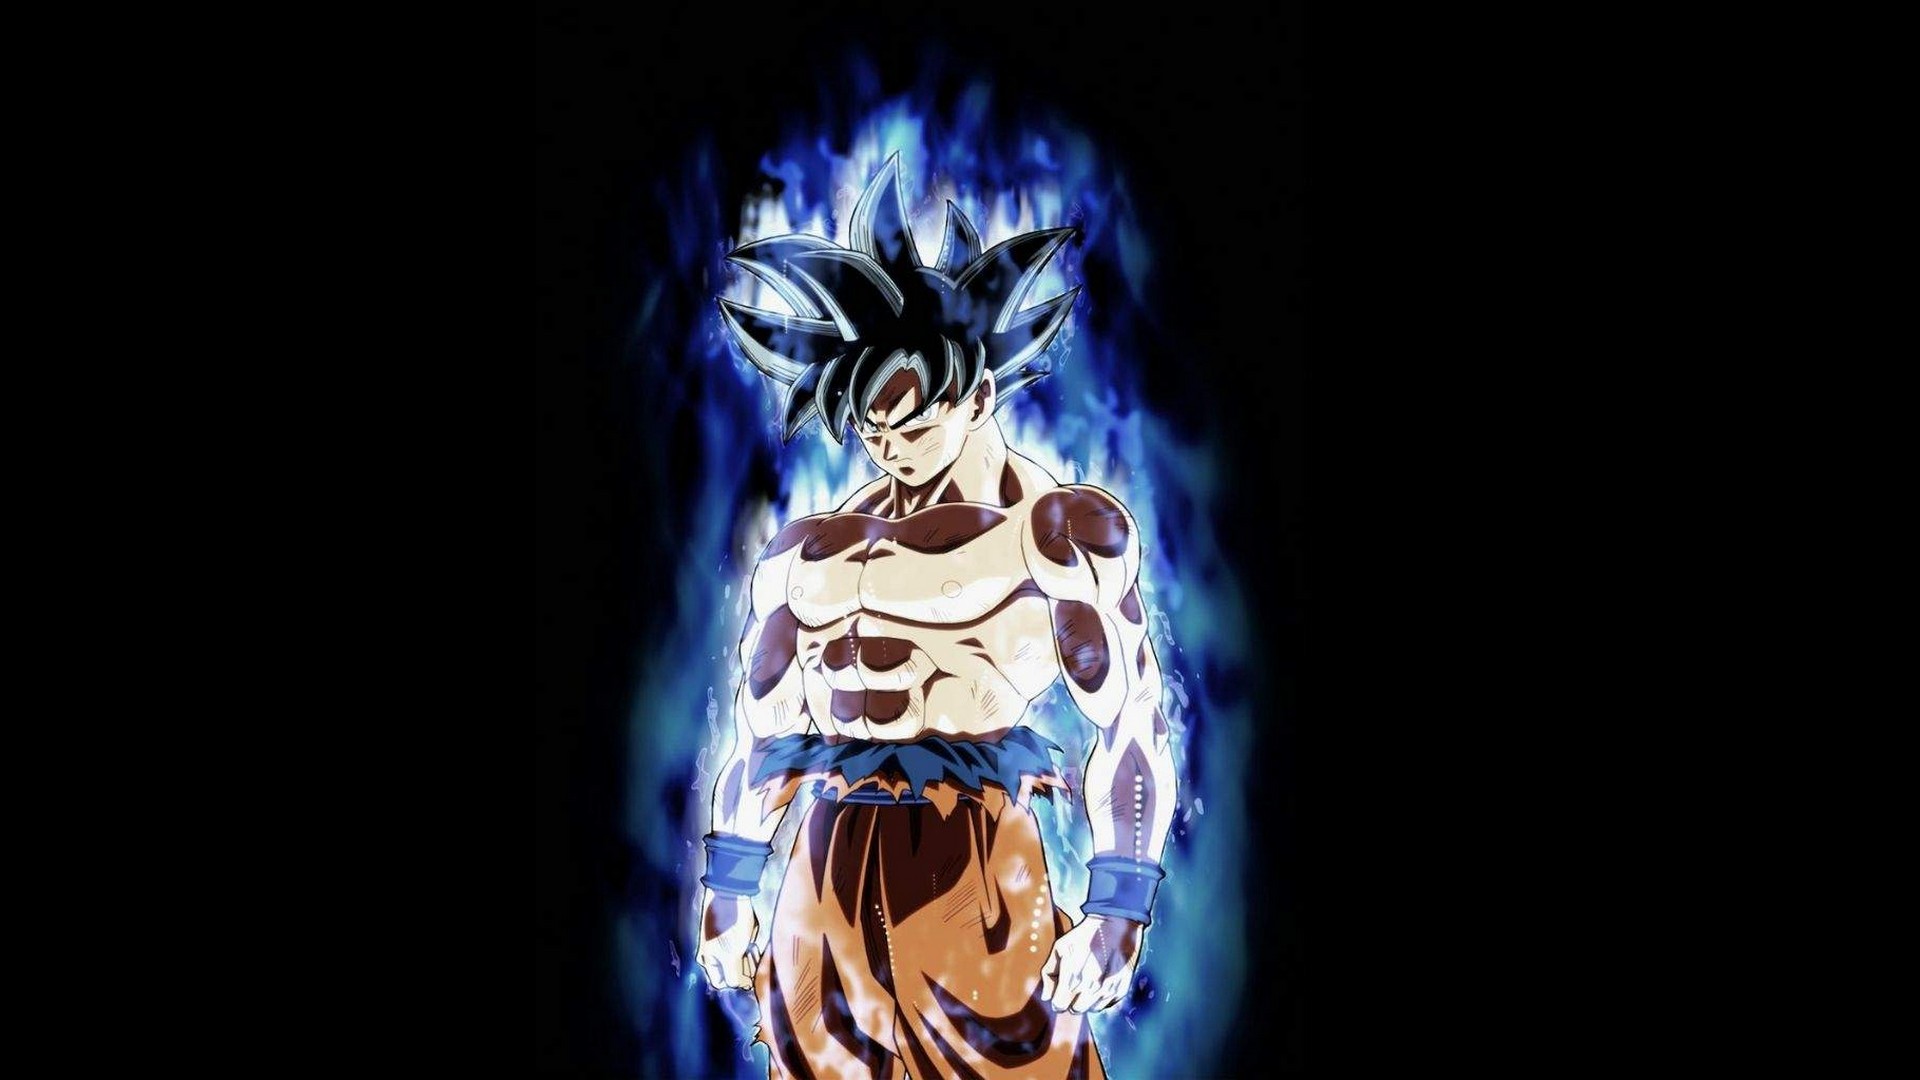 Wallpaper Goku Imagenes Desktop with image resolution 1920x1080 pixel. You can use this wallpaper as background for your desktop Computer Screensavers, Android or iPhone smartphones